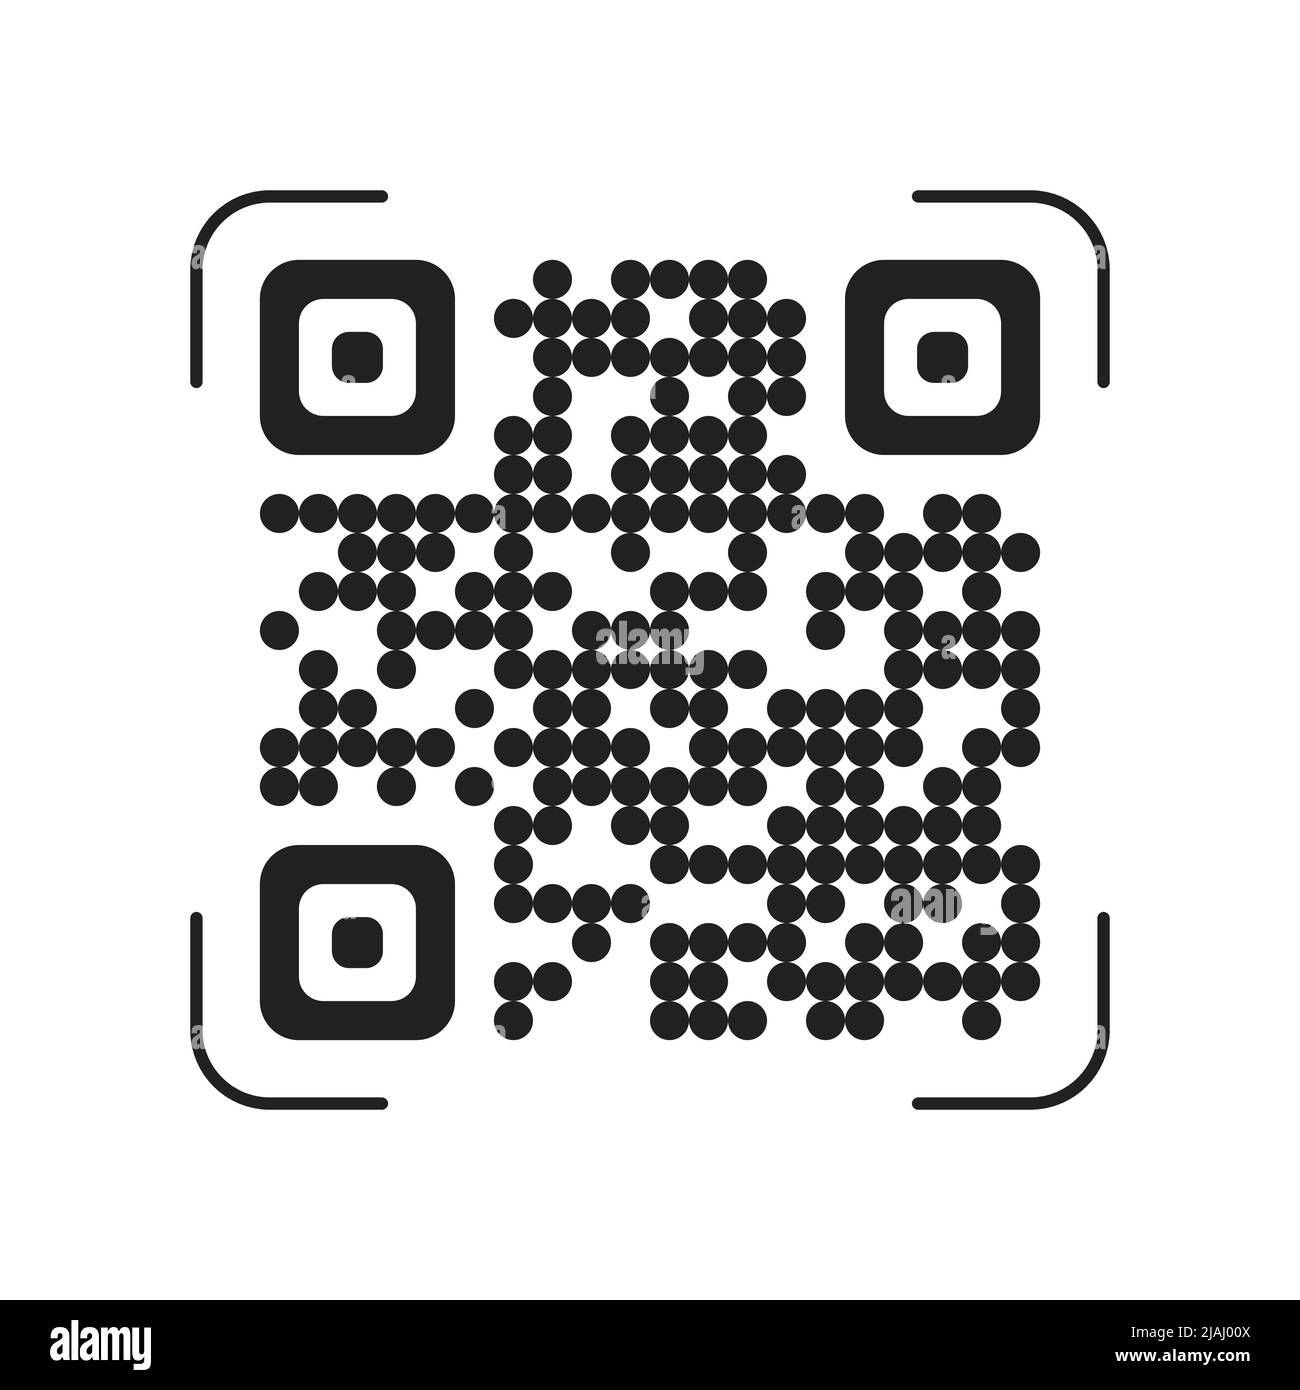 Qr code sample vector abstract icon isolated on white background. Vector illustration. Stock Vector